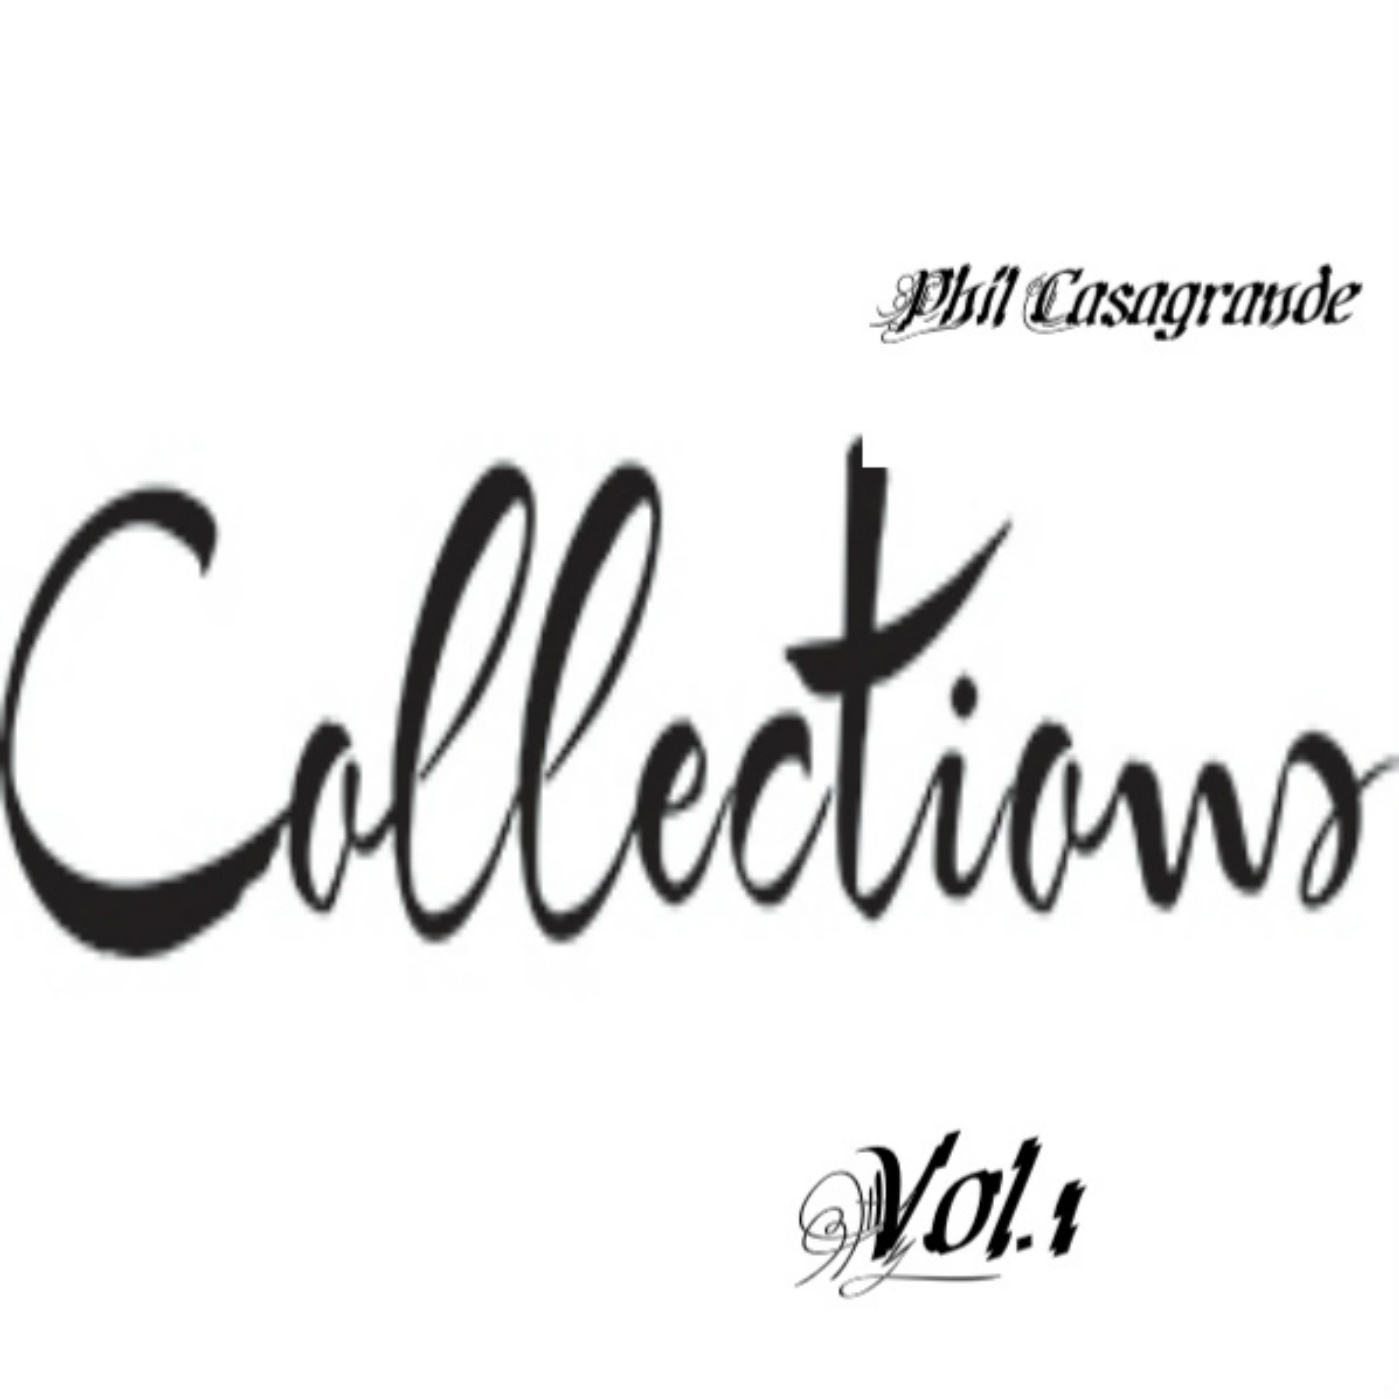 bandcamp -collections vol. one